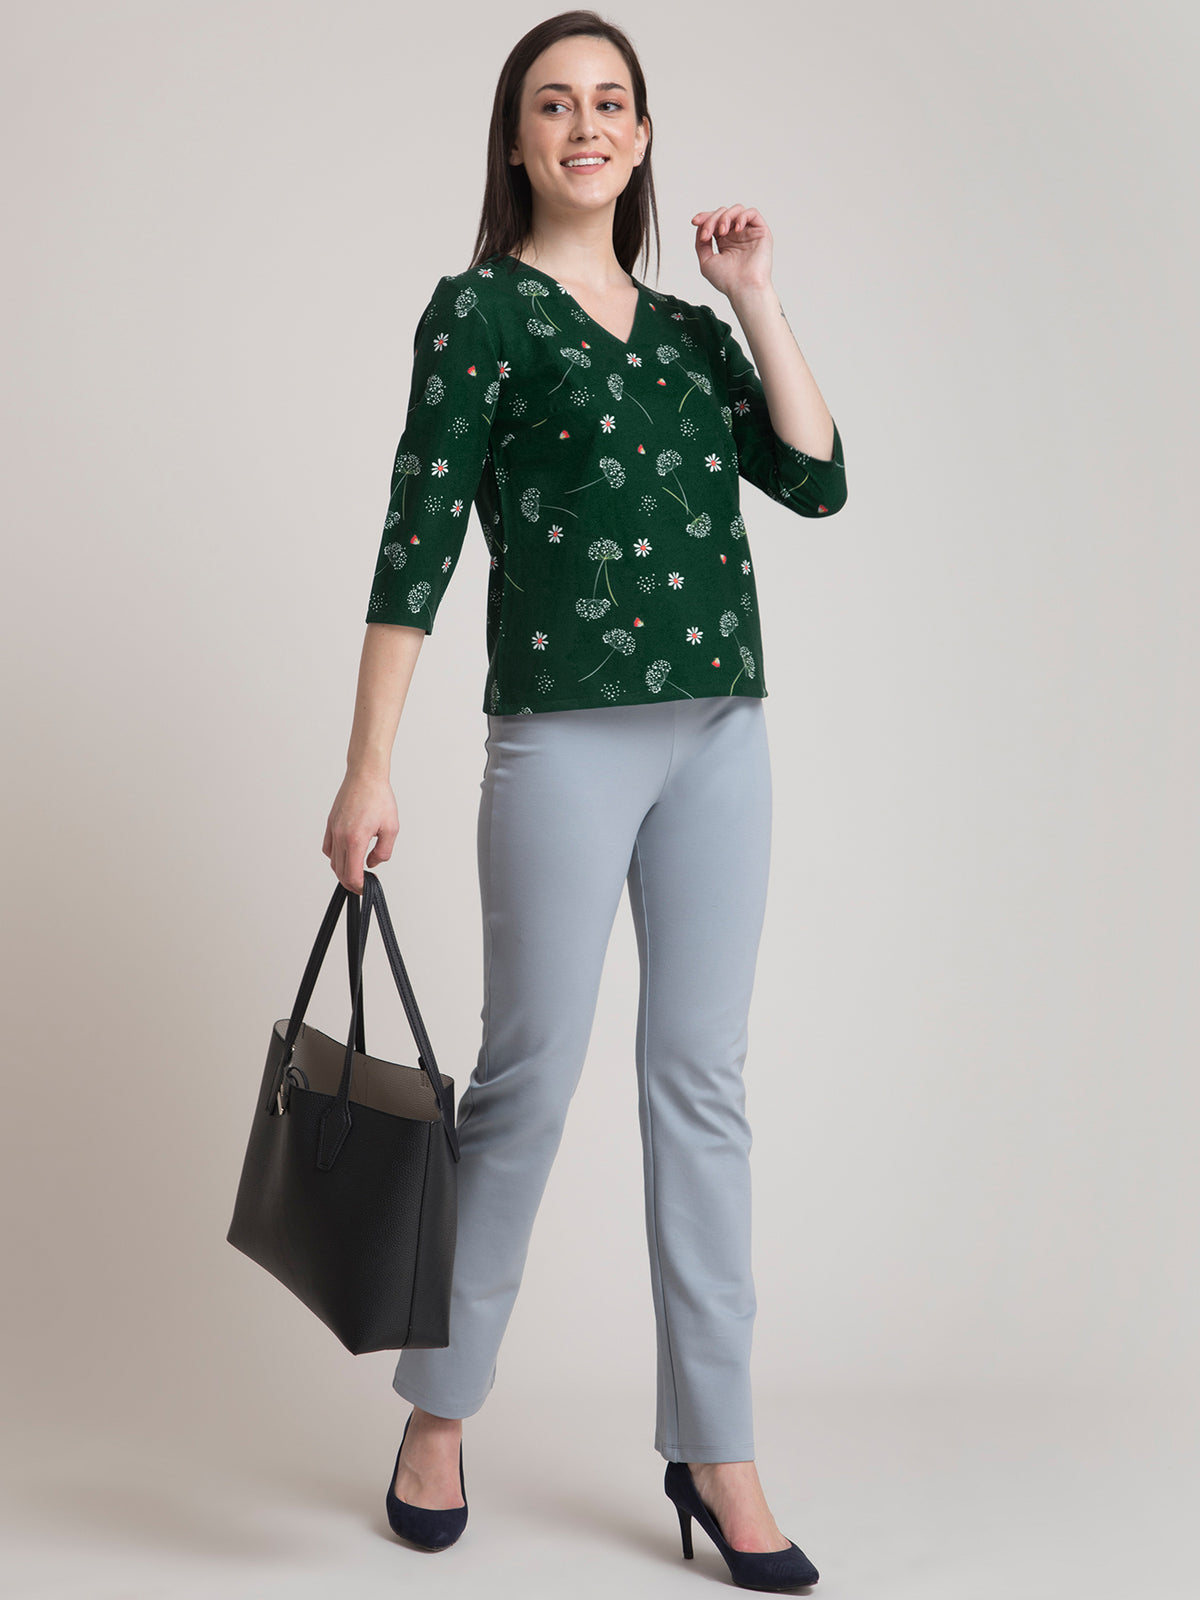 V Neck Ditsy Floral Top - Green and White